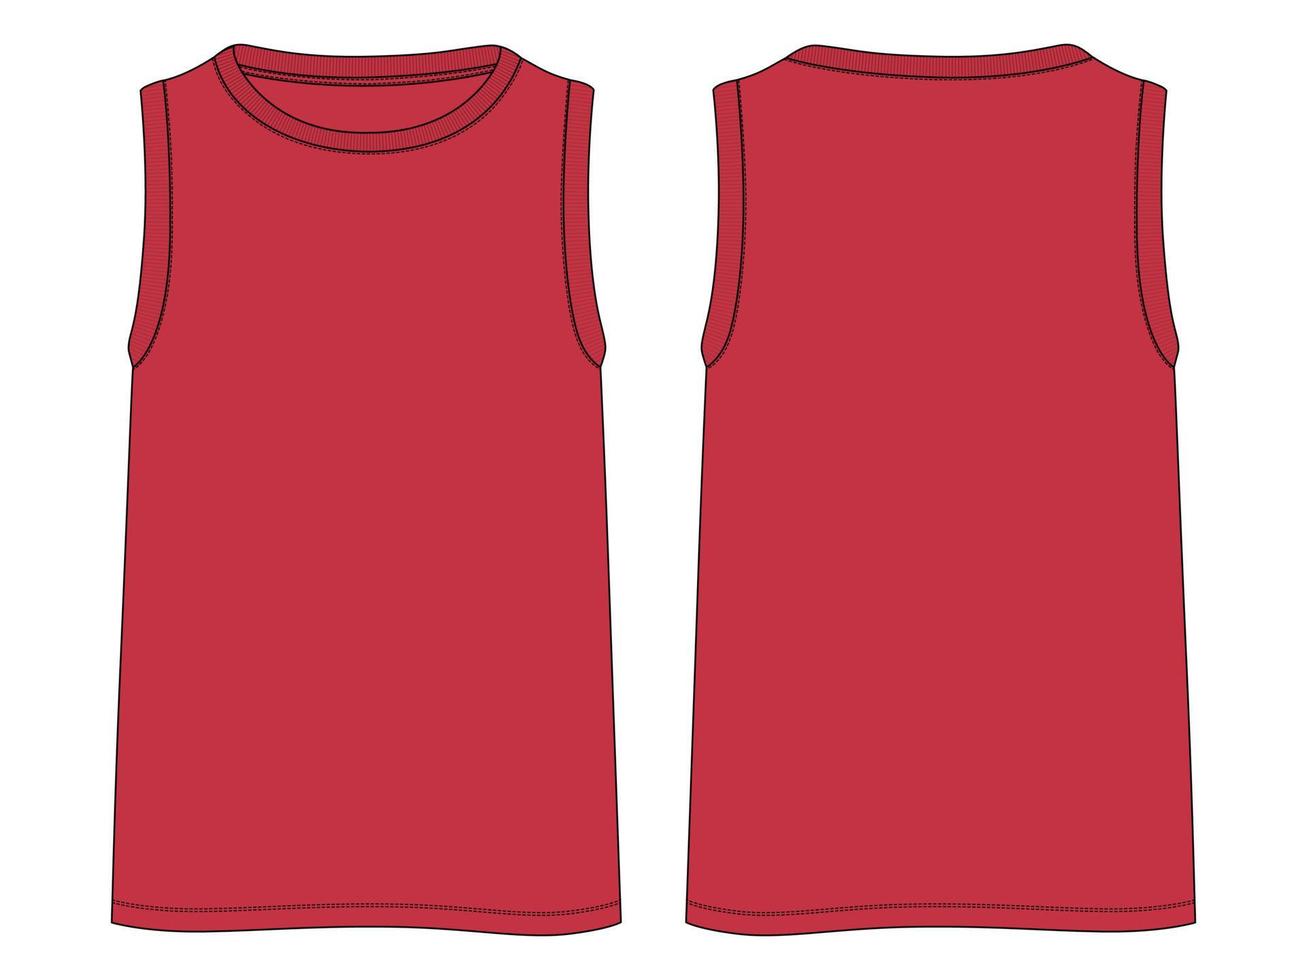 Tank Tops Technical Fashion flat sketch vector illustration Red color  template Front and back views. Apparel tank tops mock up for men's and boys.